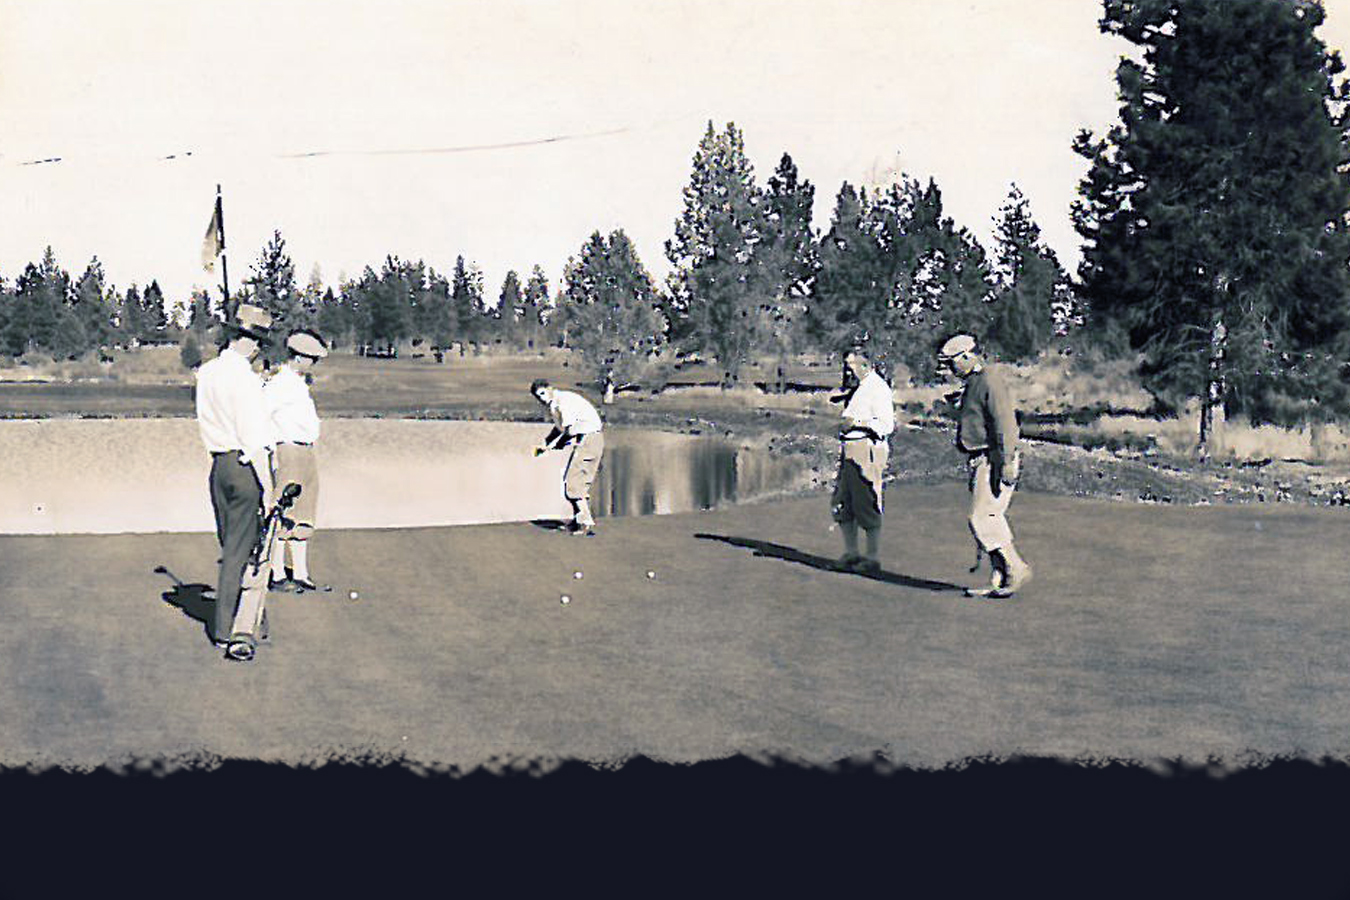  A foursome finishes putting on #11, which at the time of this photo was #7 on the original 9-hole course. 